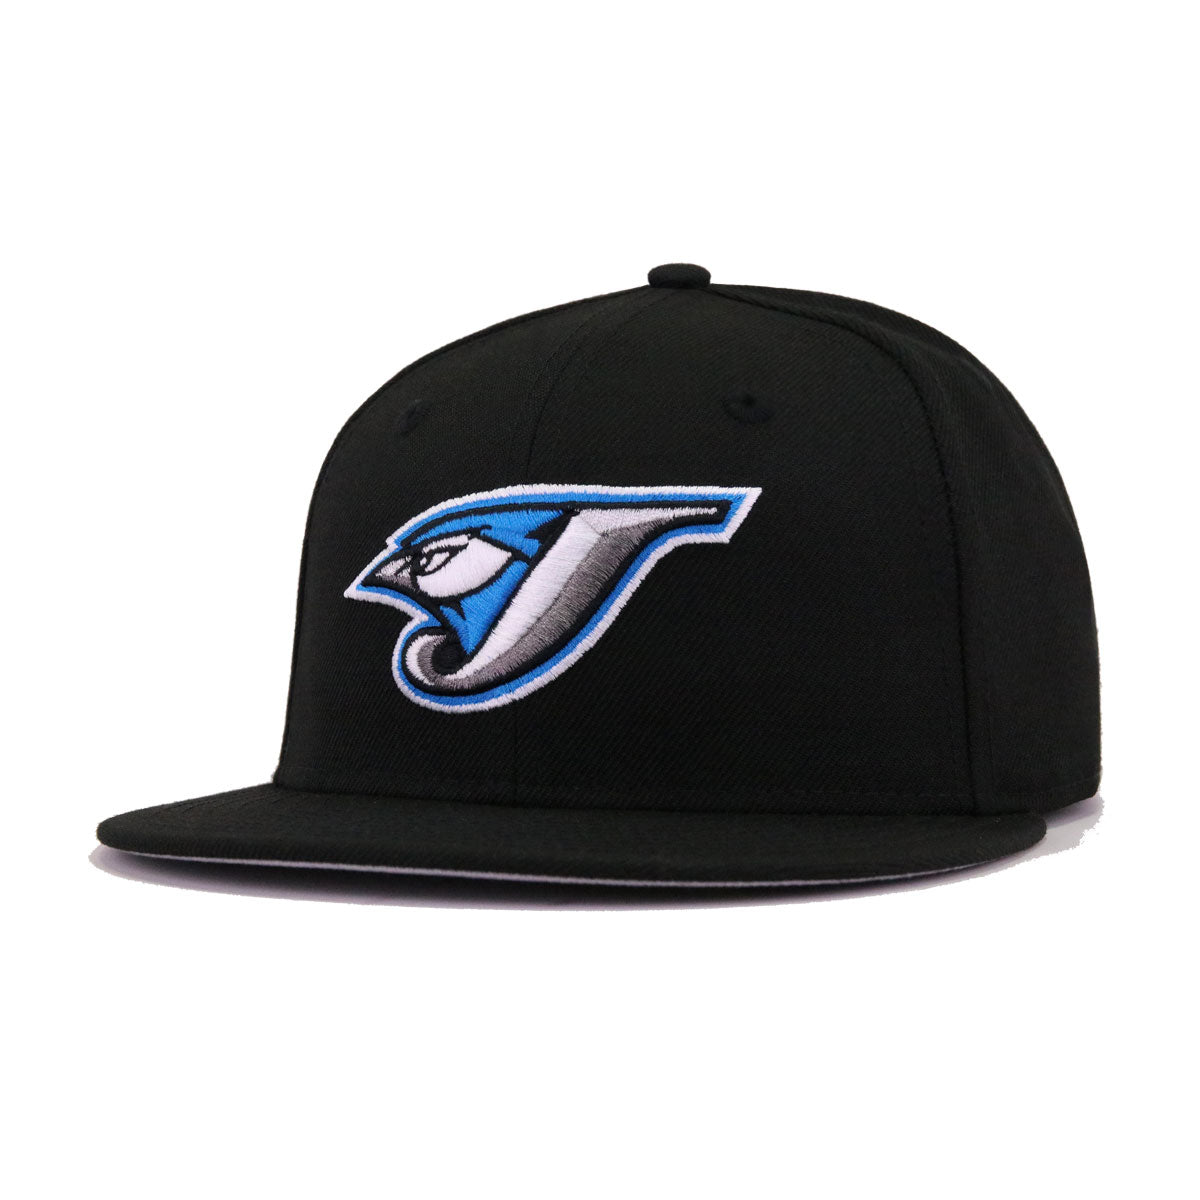 Men’s New Era Toronto Blue Jays Cooperstown Collection Retro 59FIFTY Fitted  Cap